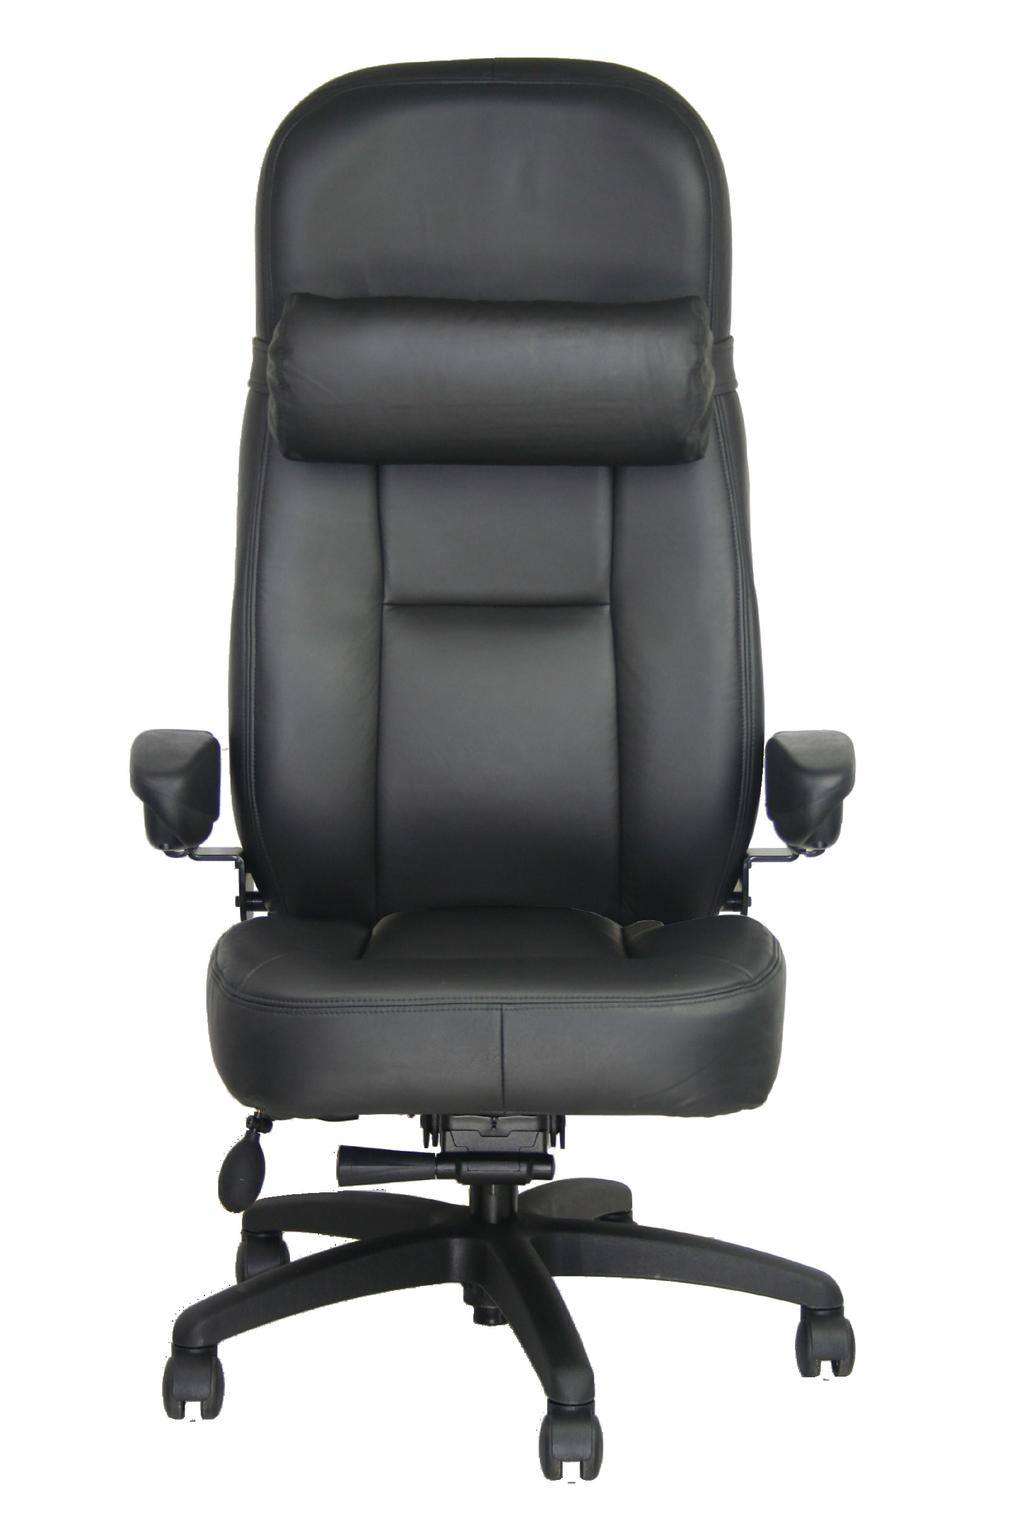 BIG & TALL The IRON HORSE Seating Big & Tall features the latest ergonomic designs and commercial grade components.